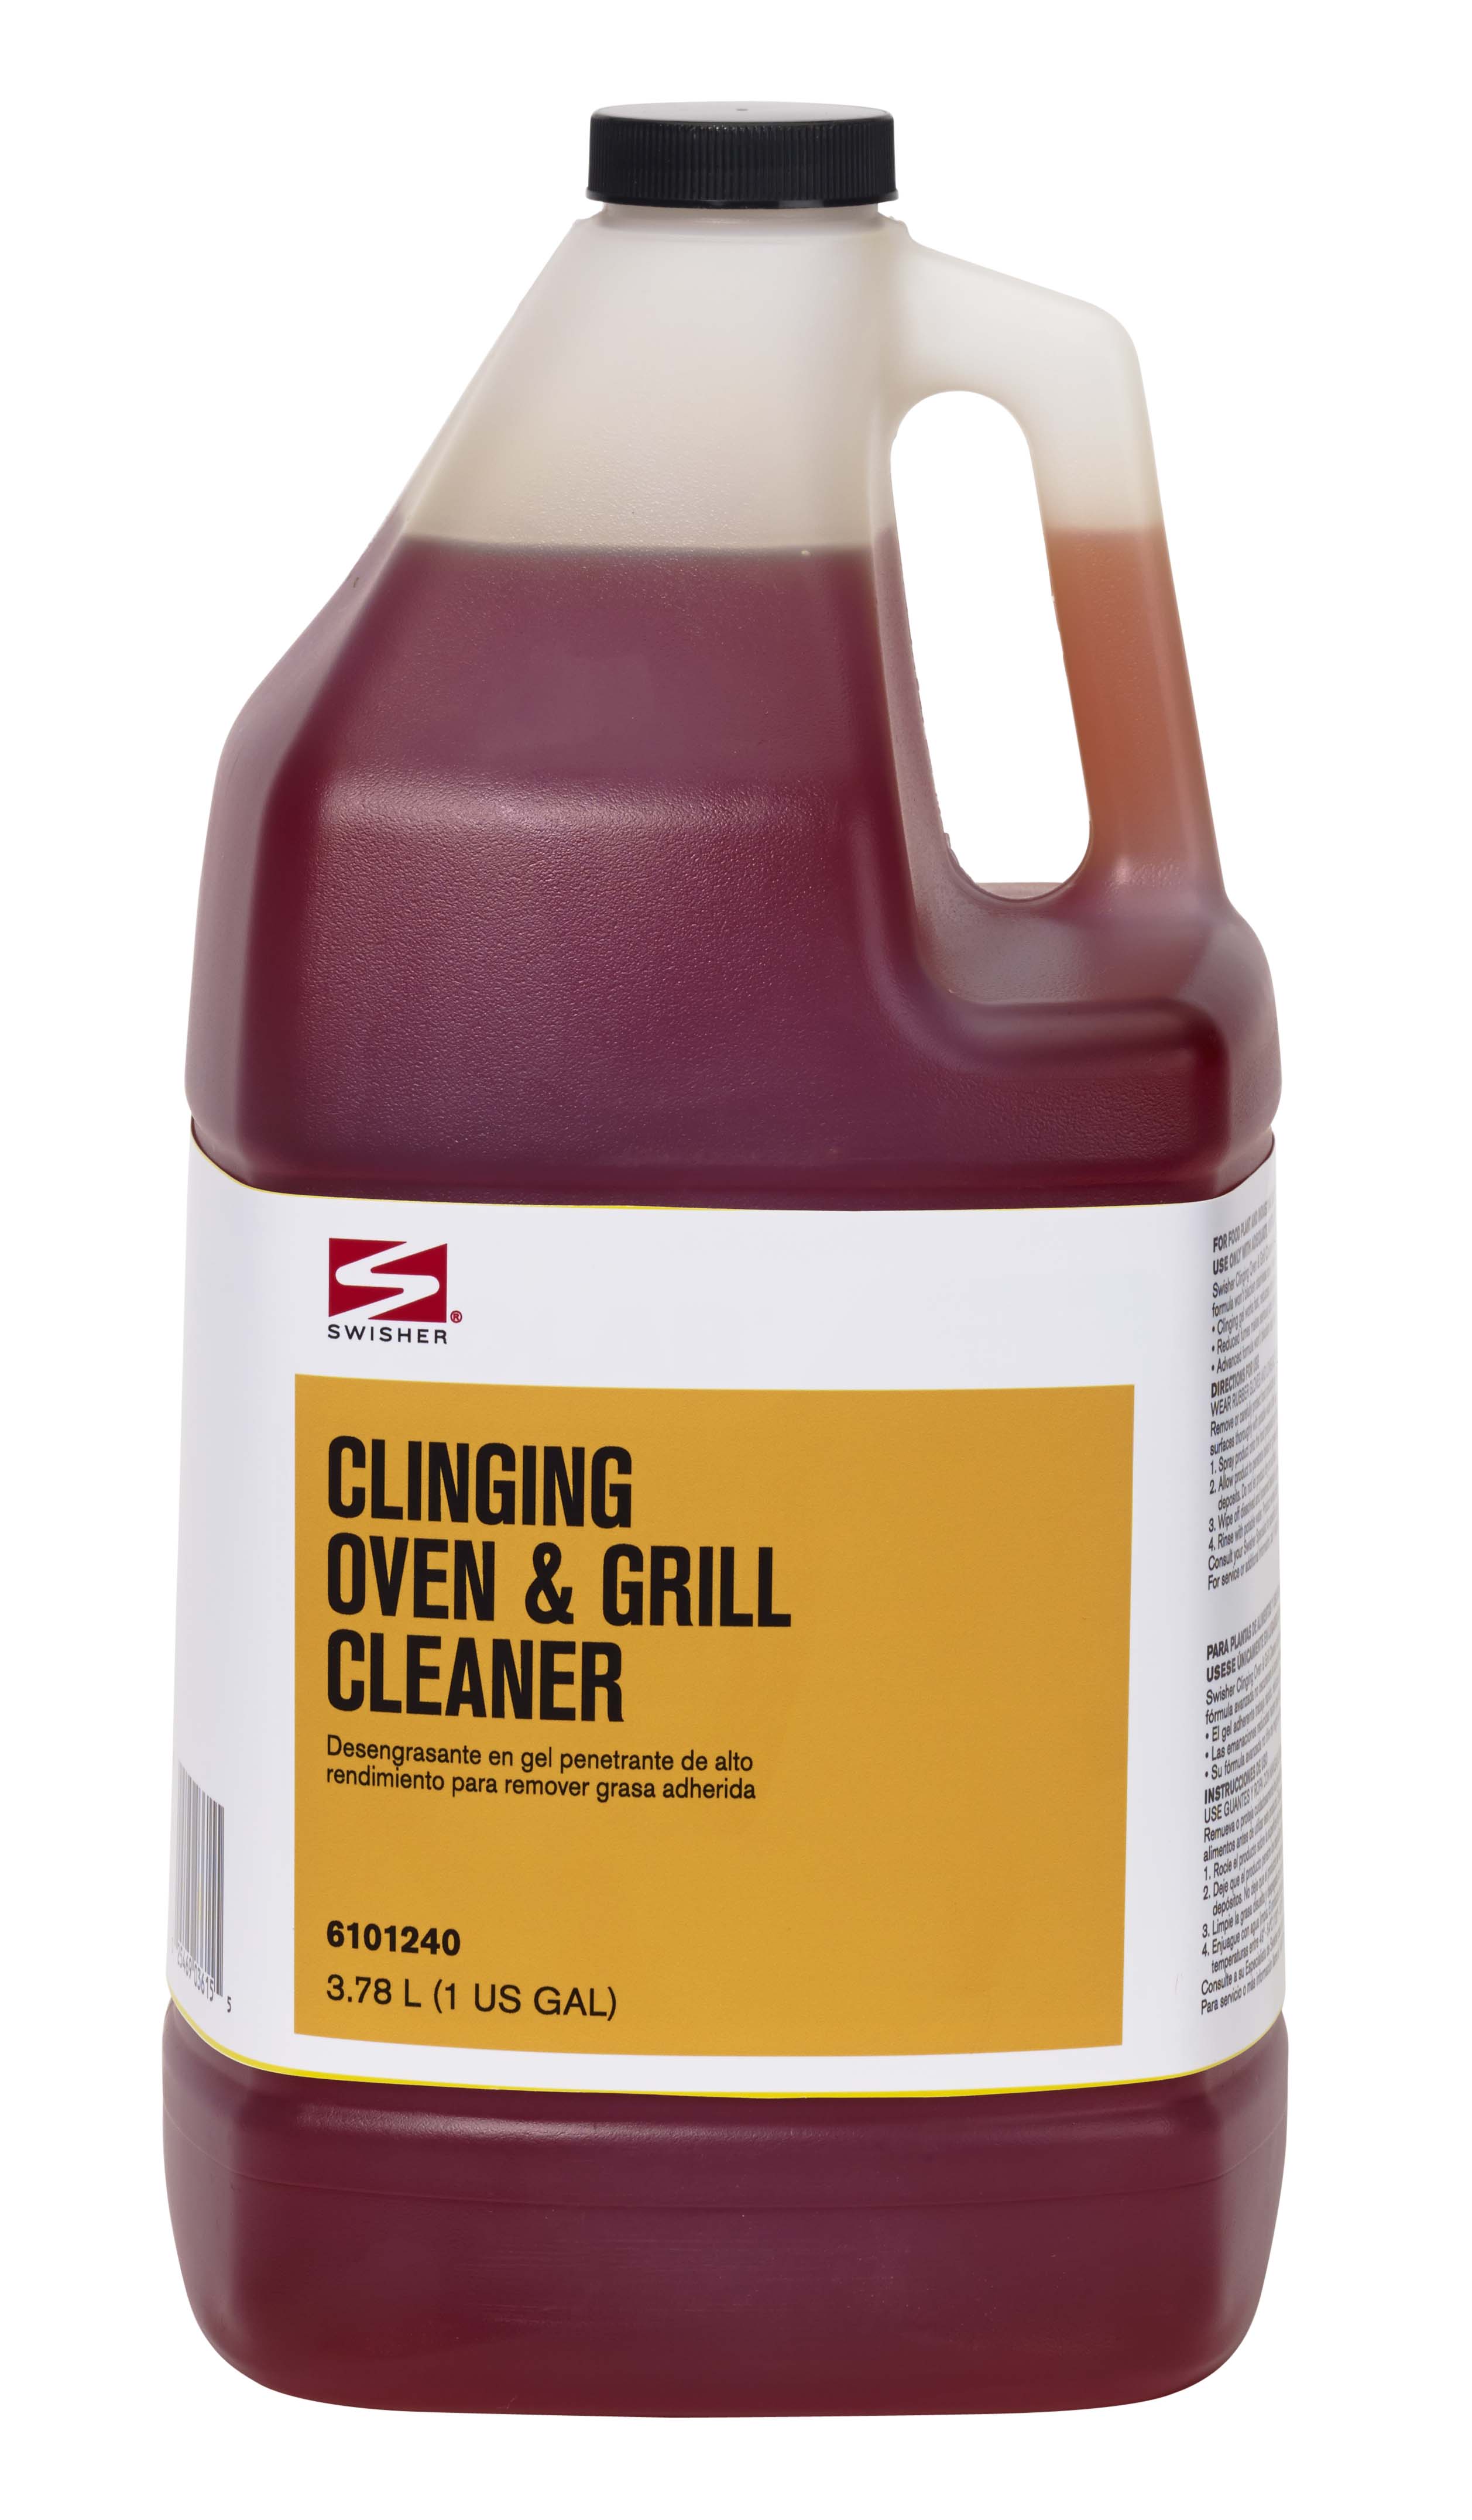 Total Clean Oven & Grill Cleaner, 1 Gallon - Case of 4 Bottles